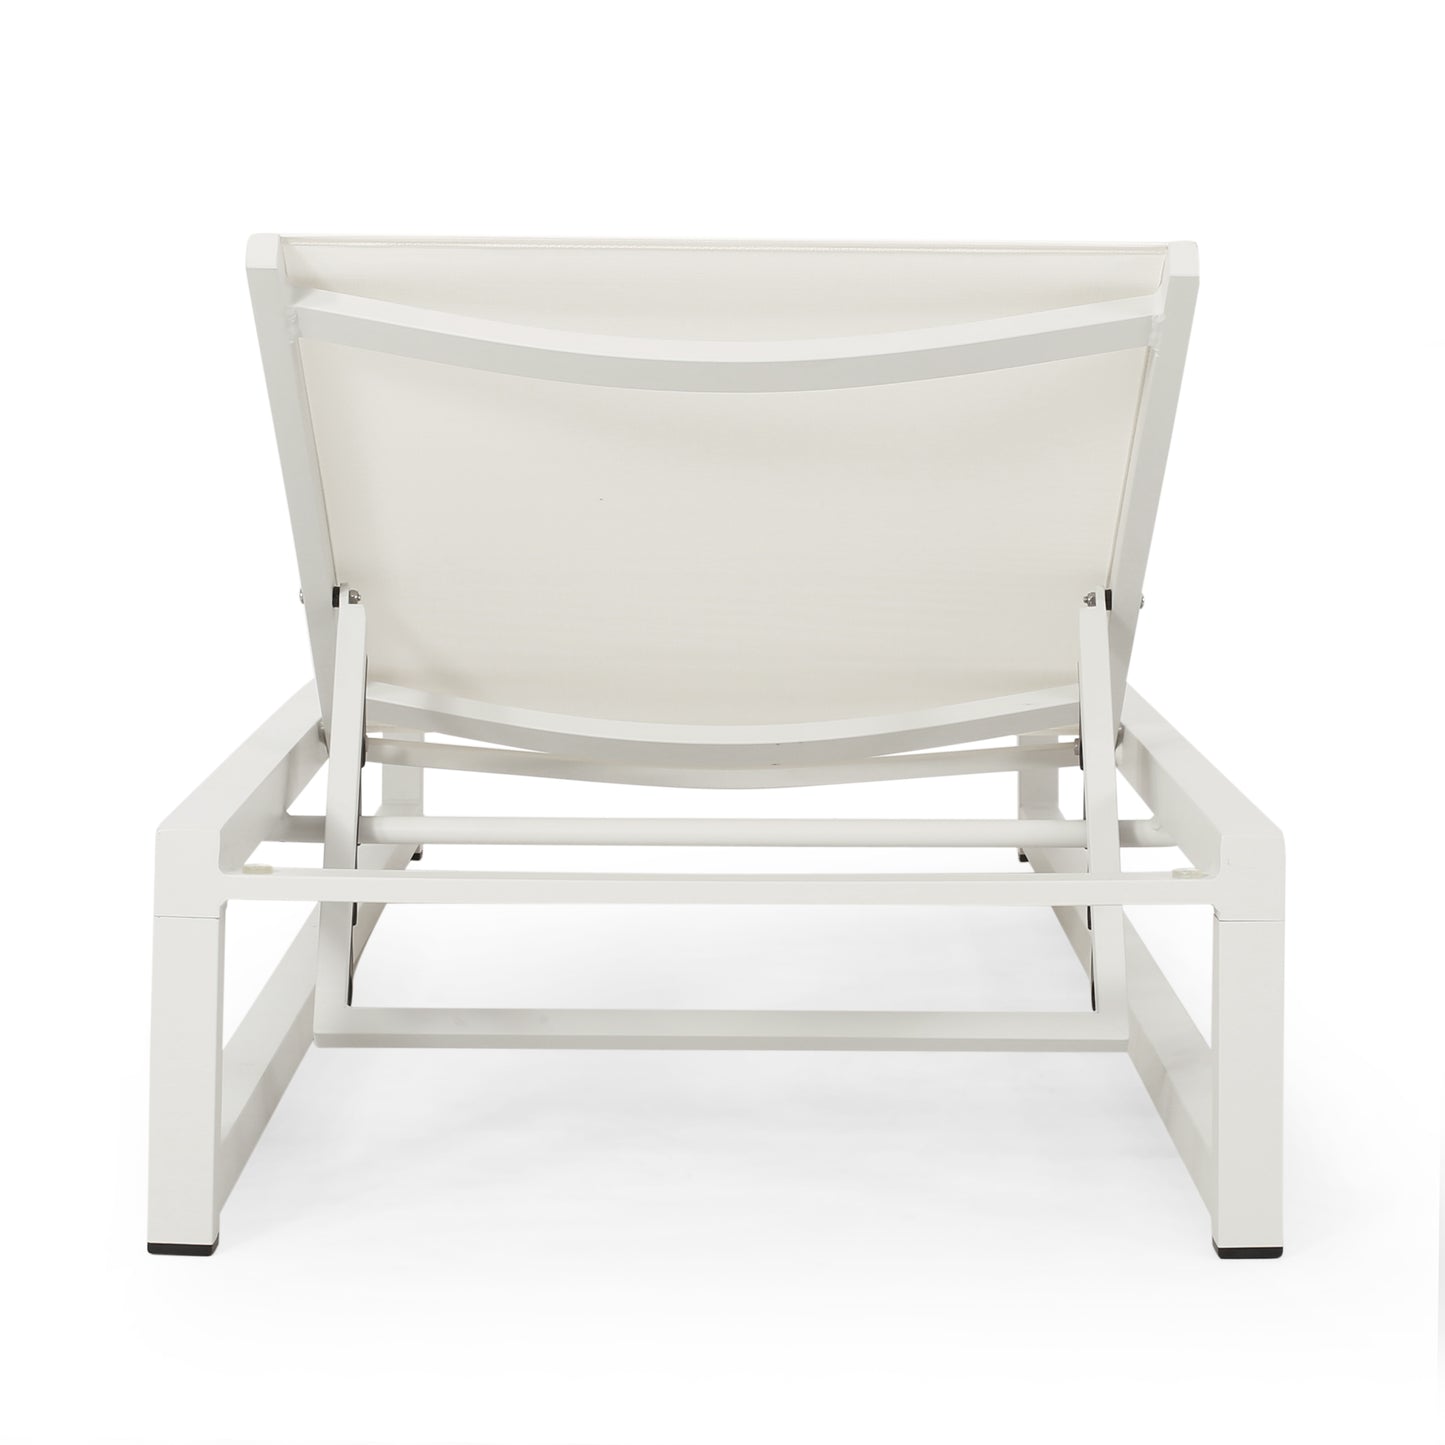 Moderna Outdoor Aluminum Chaise Lounge with Mesh Seating (Set of 2)